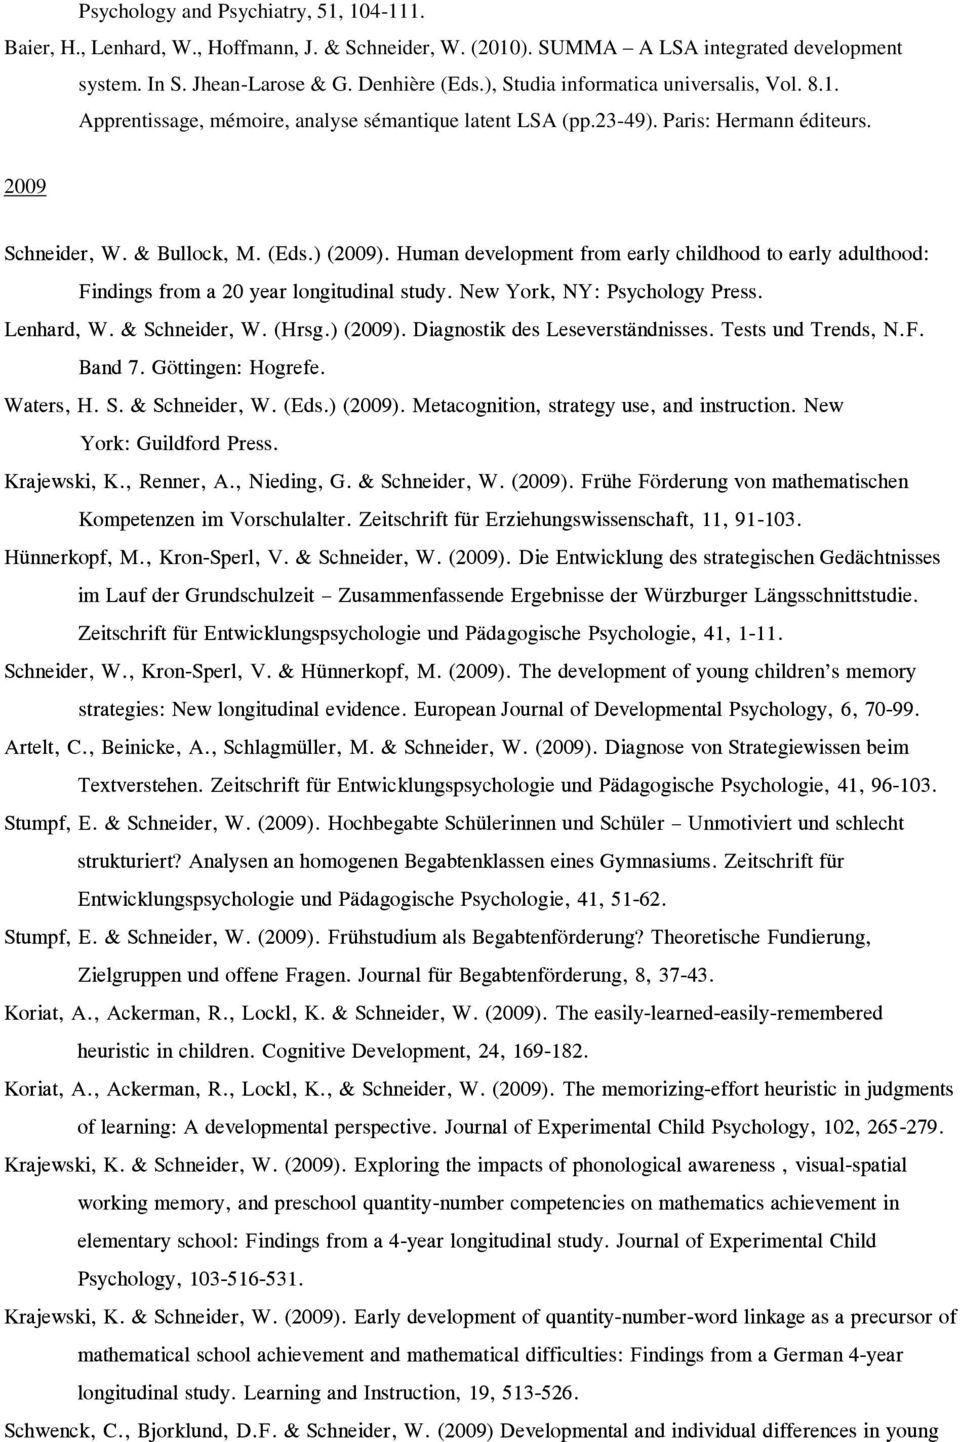 Human development from early childhood to early adulthood: Findings from a 20 year longitudinal study. New York, NY: Psychology Press. Lenhard, W. & Schneider, W. (Hrsg.) (2009).